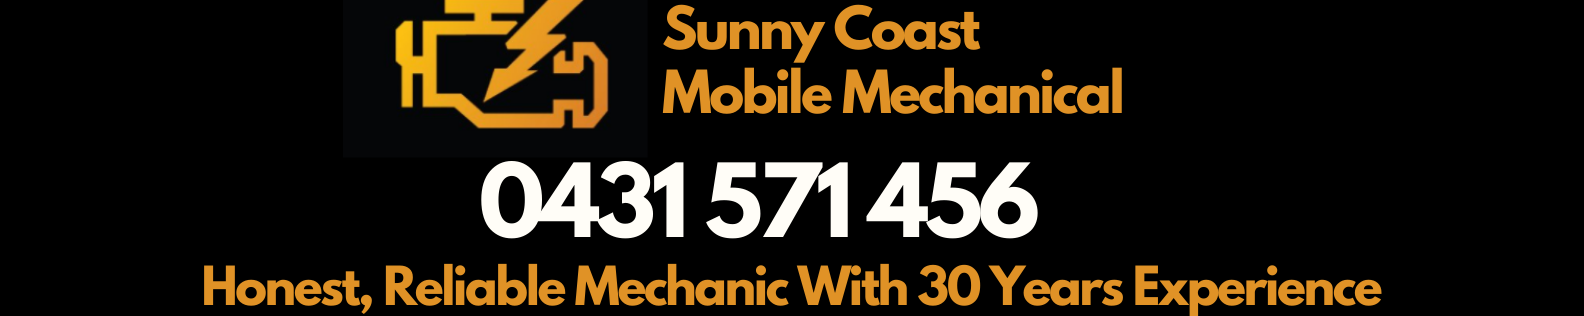 Mobile Mechanic Near Me - Check Out Our Services